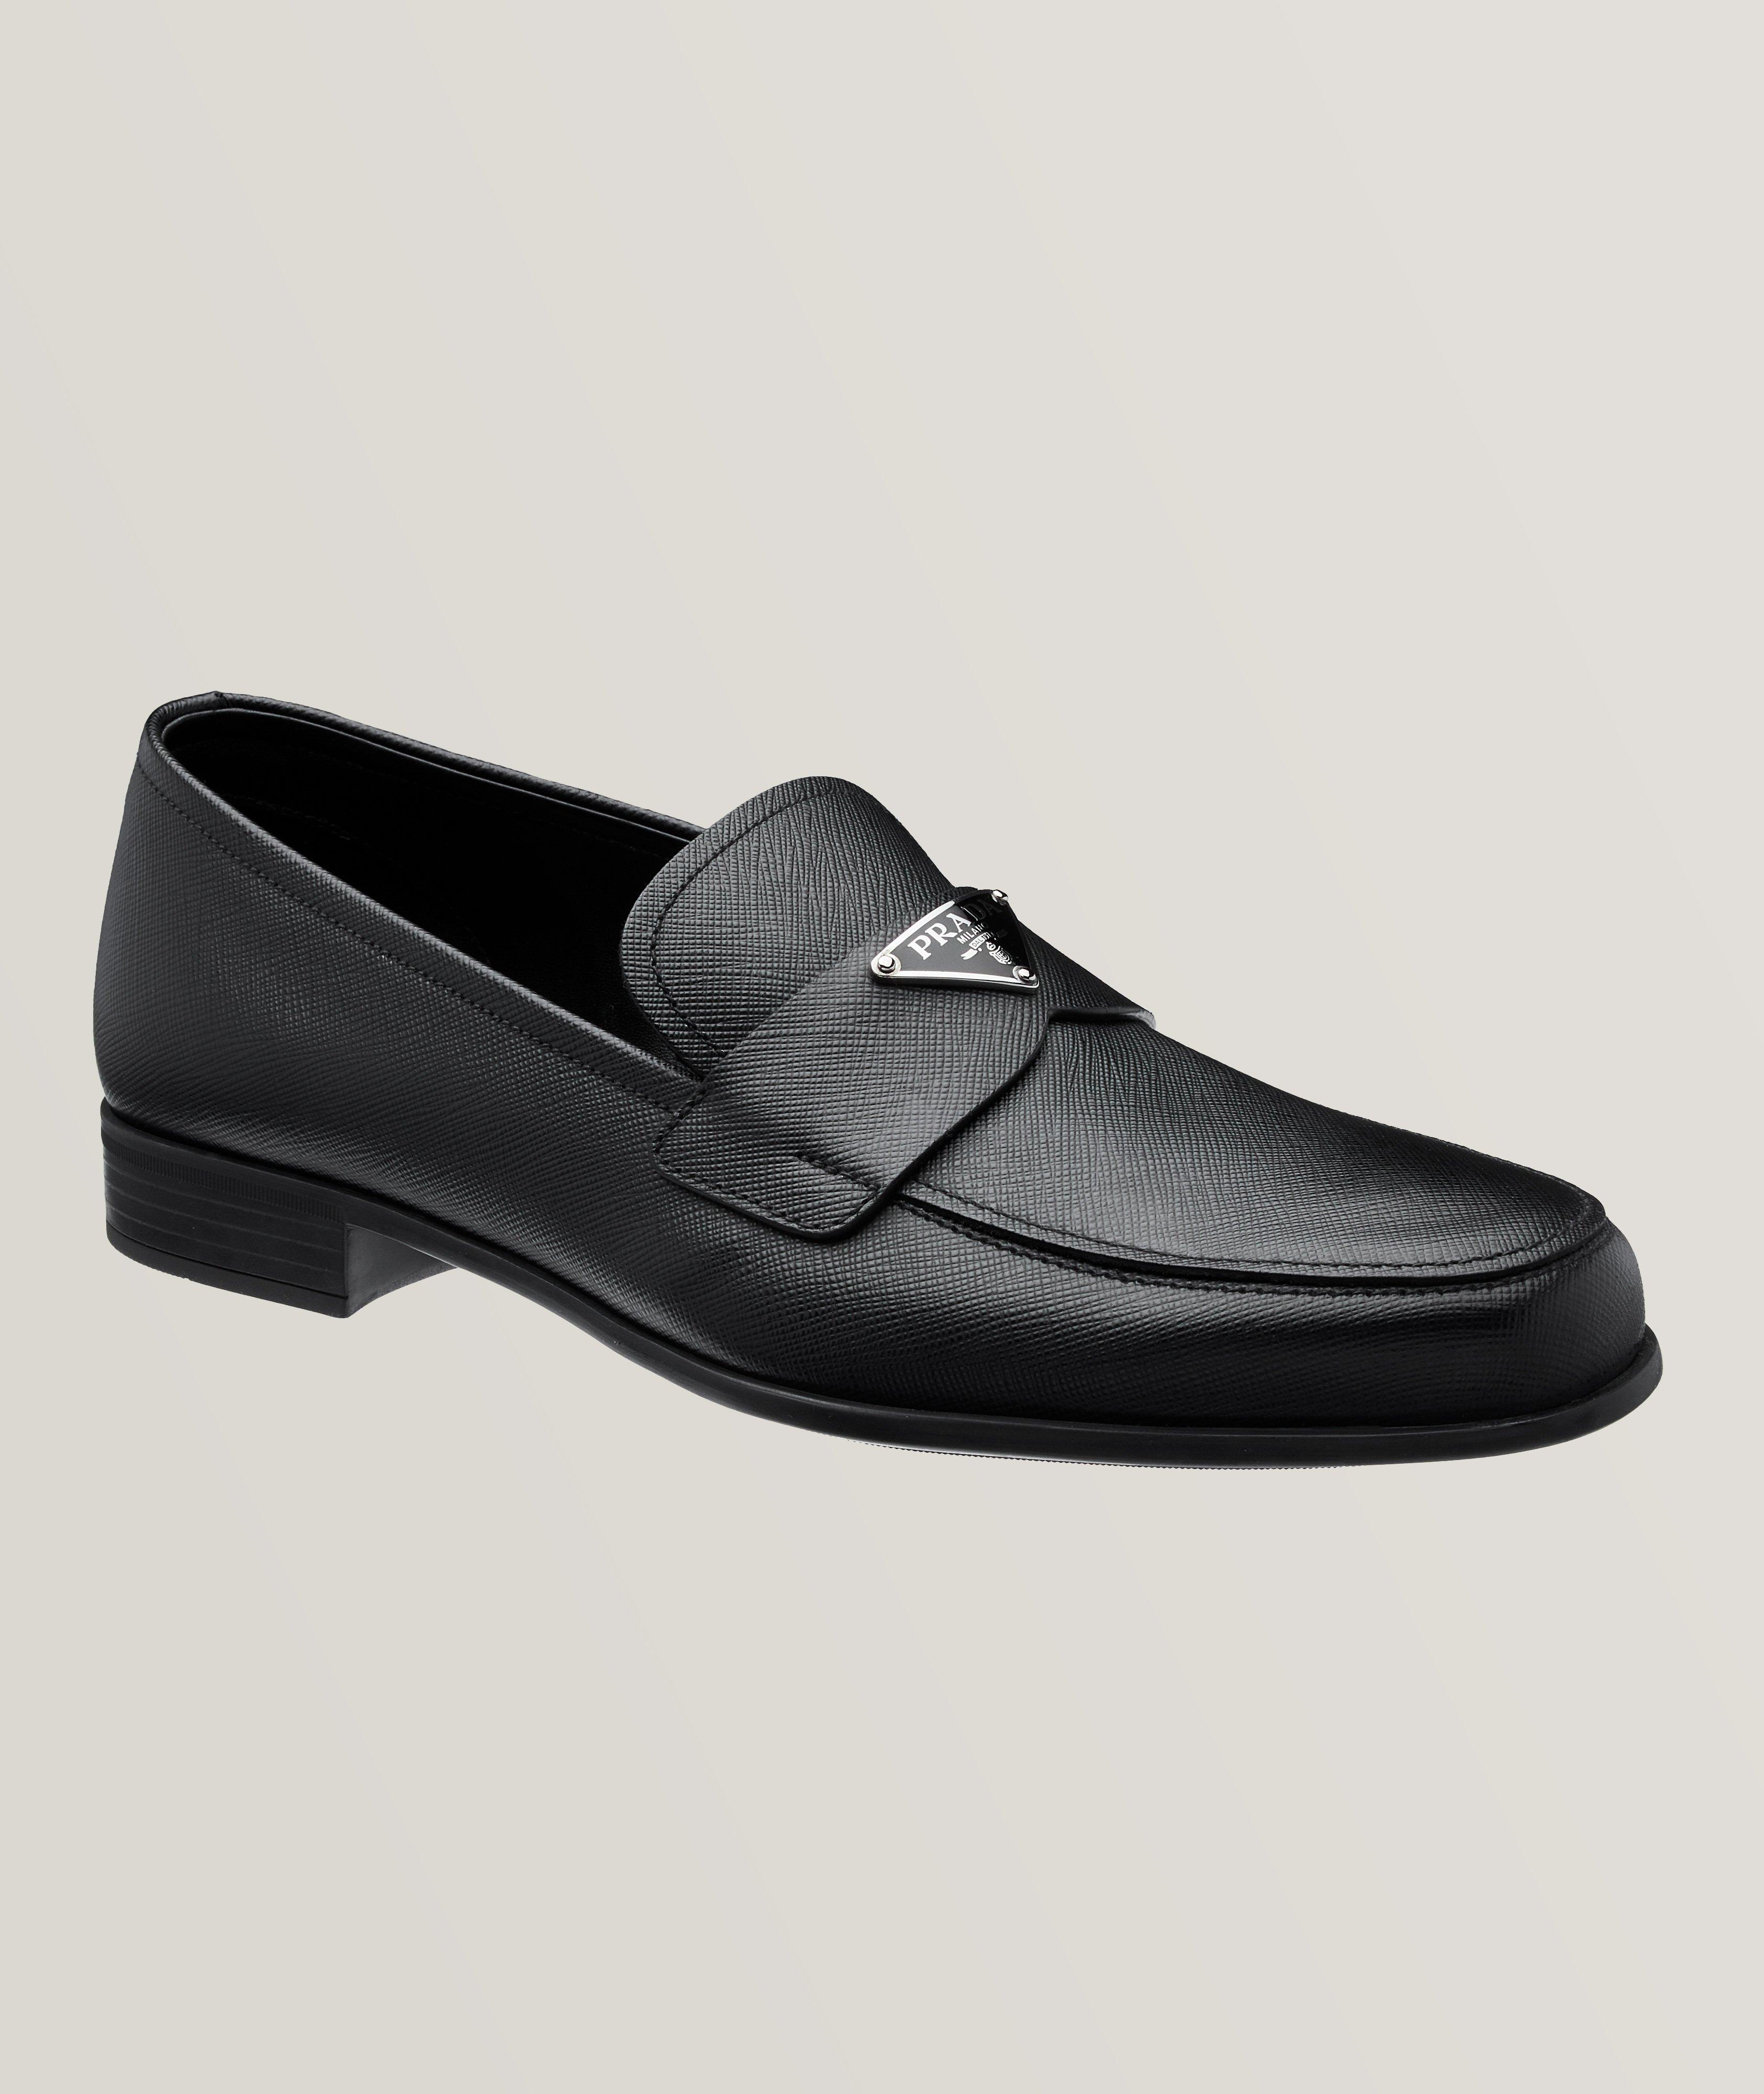 Prada Plaque Logo Grained Leather Loafers